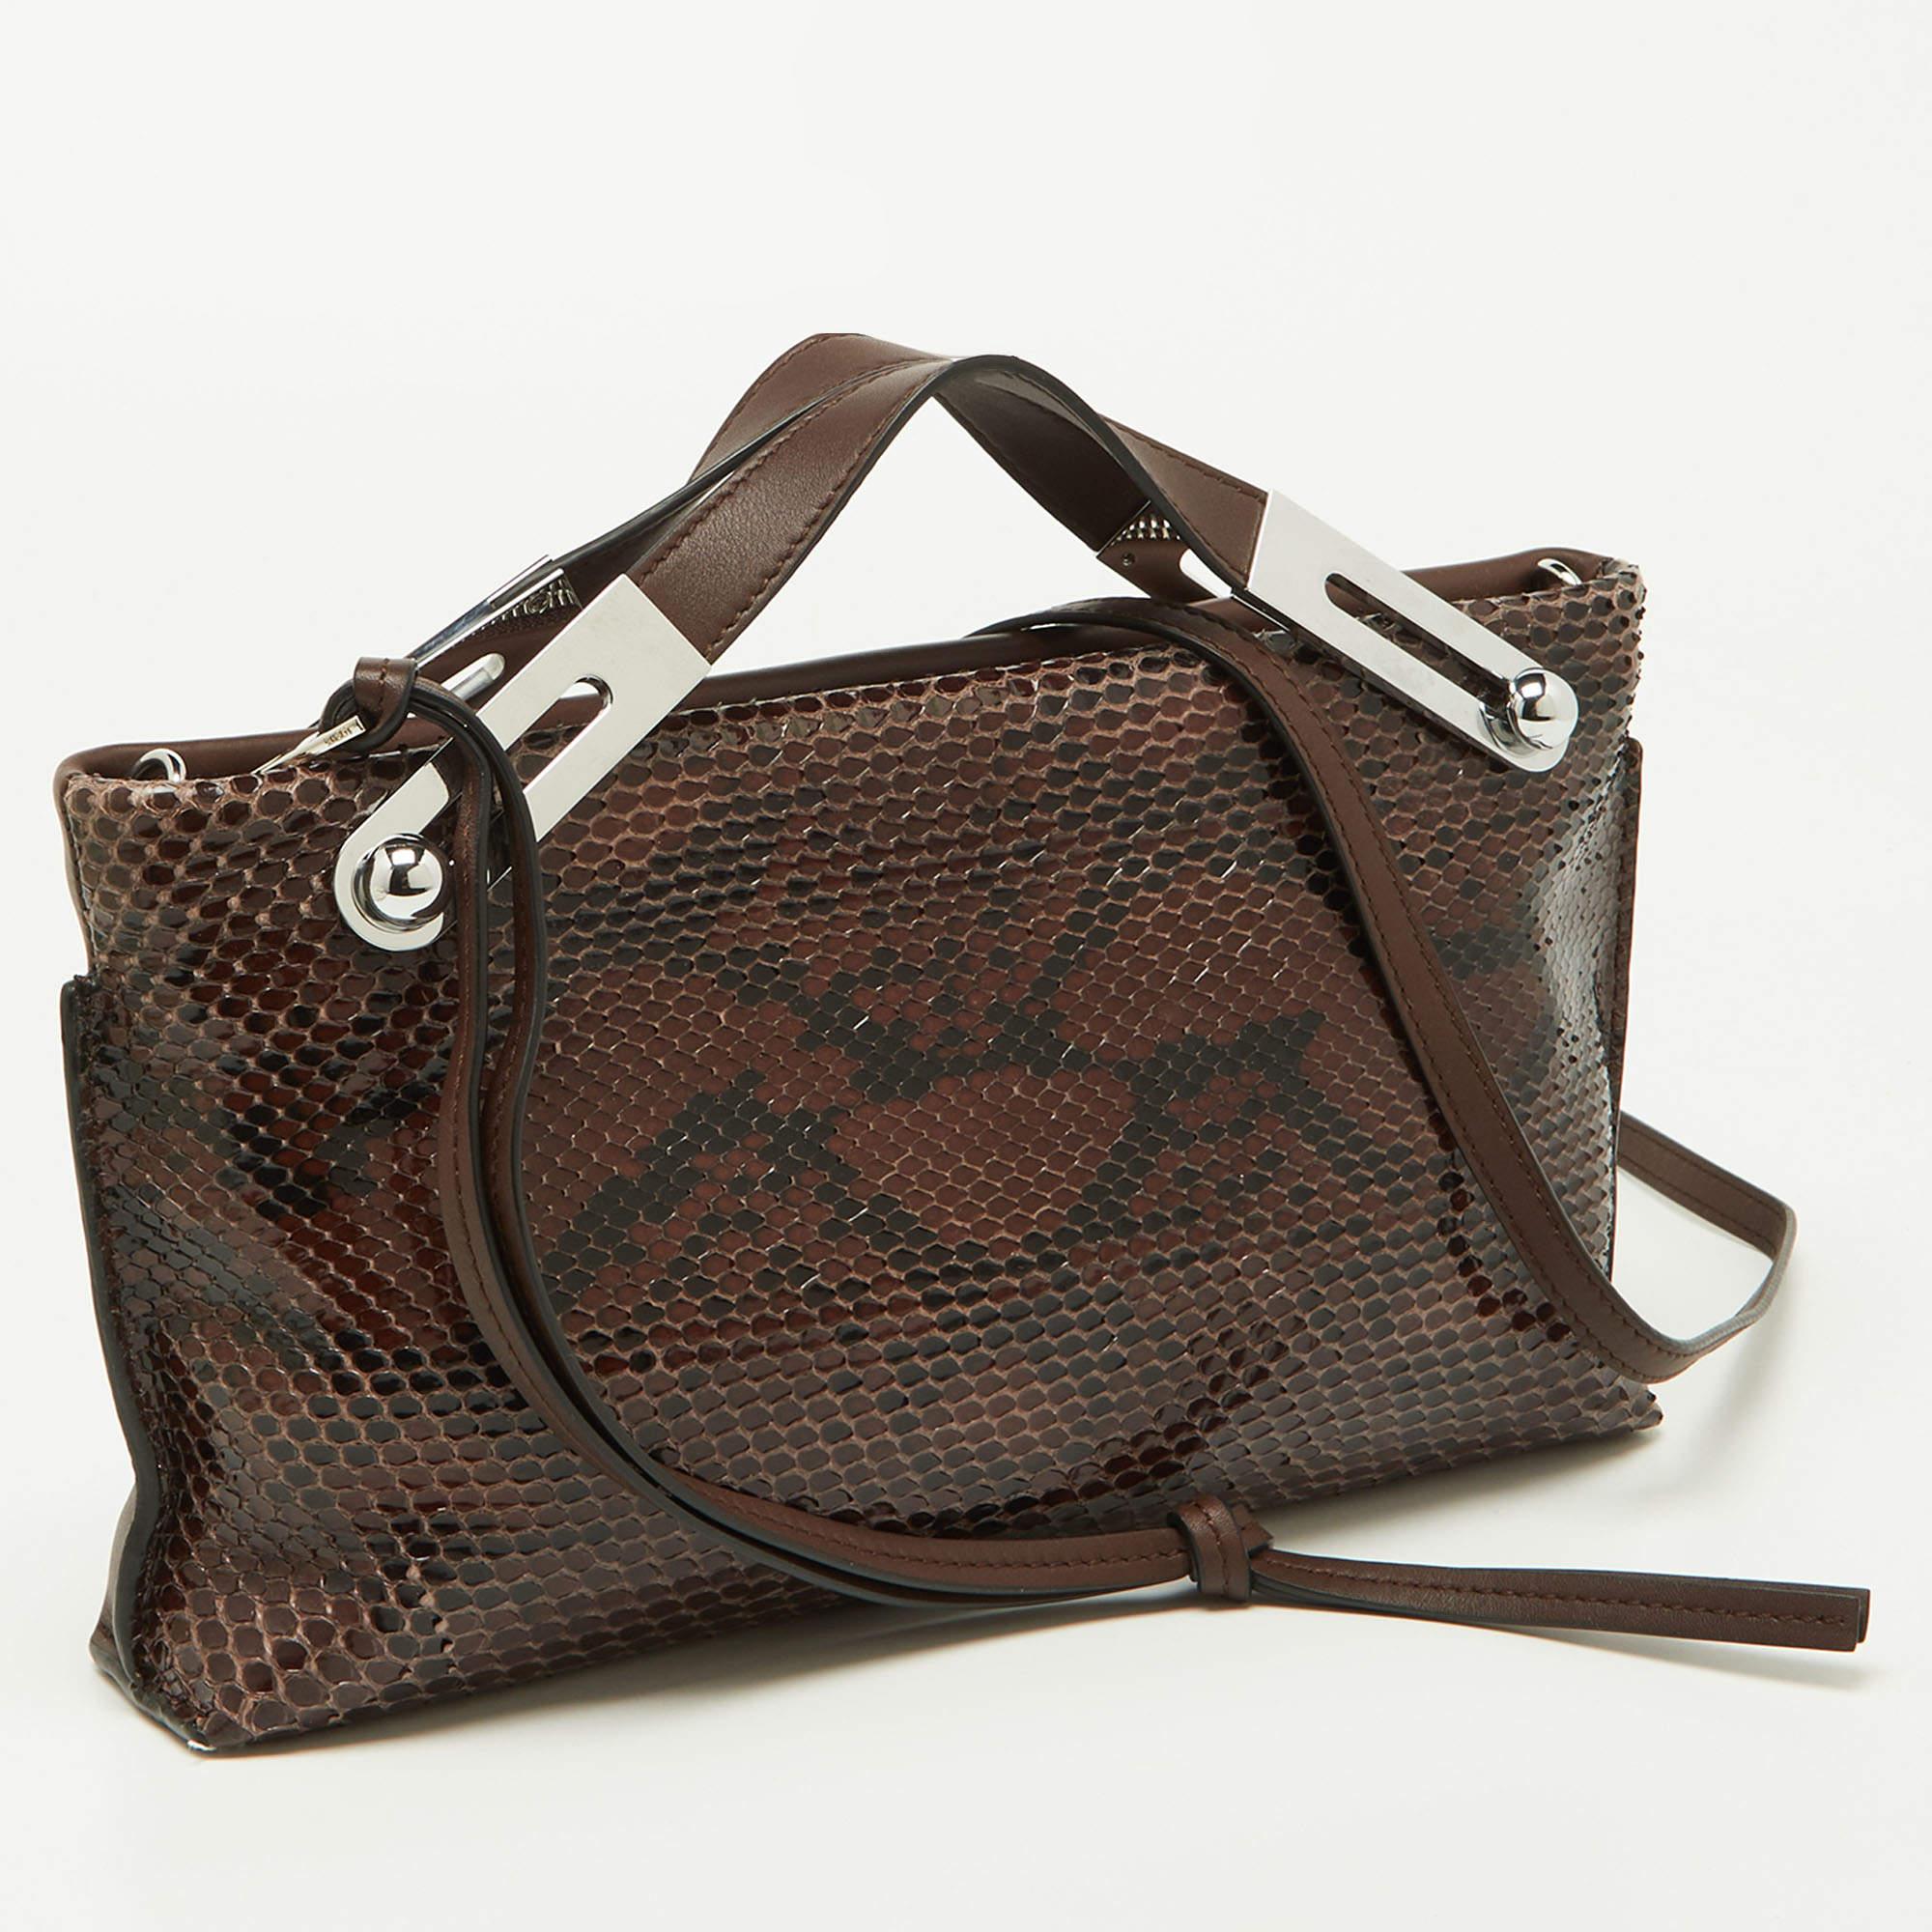 Express your personal style with this high-end crossbody bag. Crafted from quality materials, it has been added with fine details and is finished perfectly. It features a well-sized interior.

